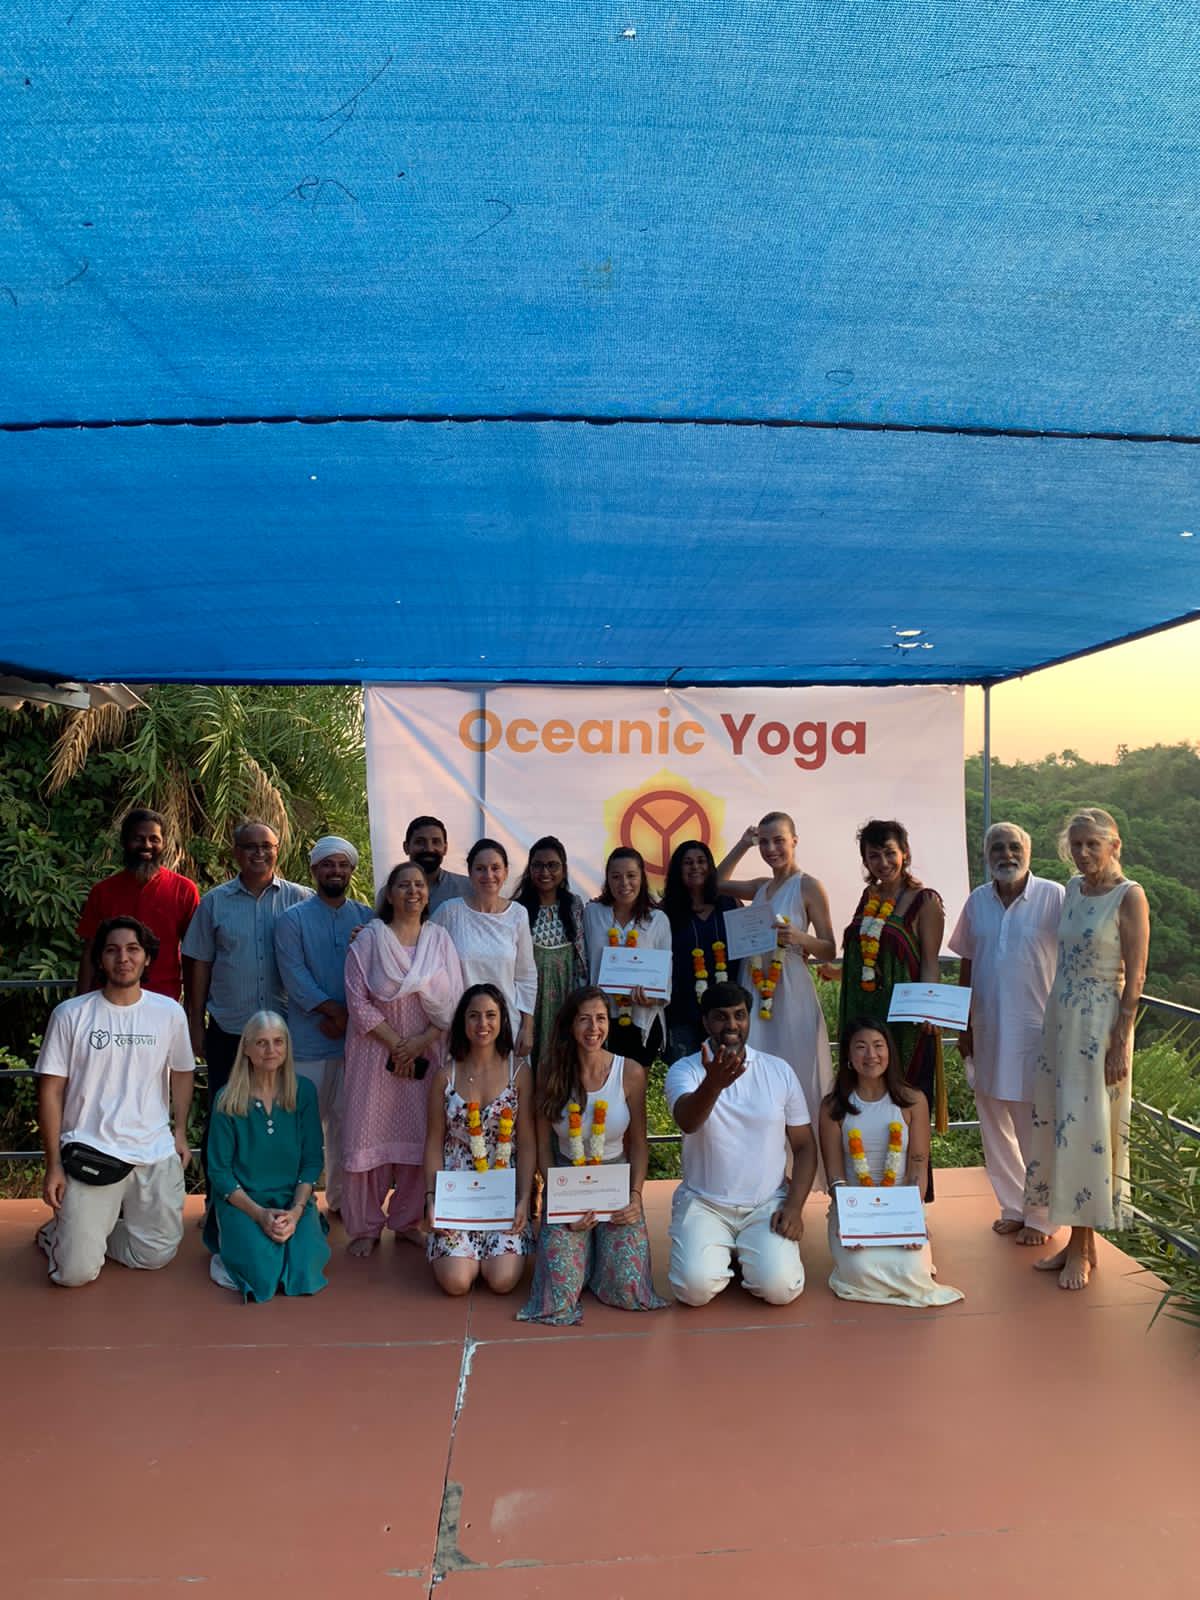 Get an awesome yoga teacher training school in India